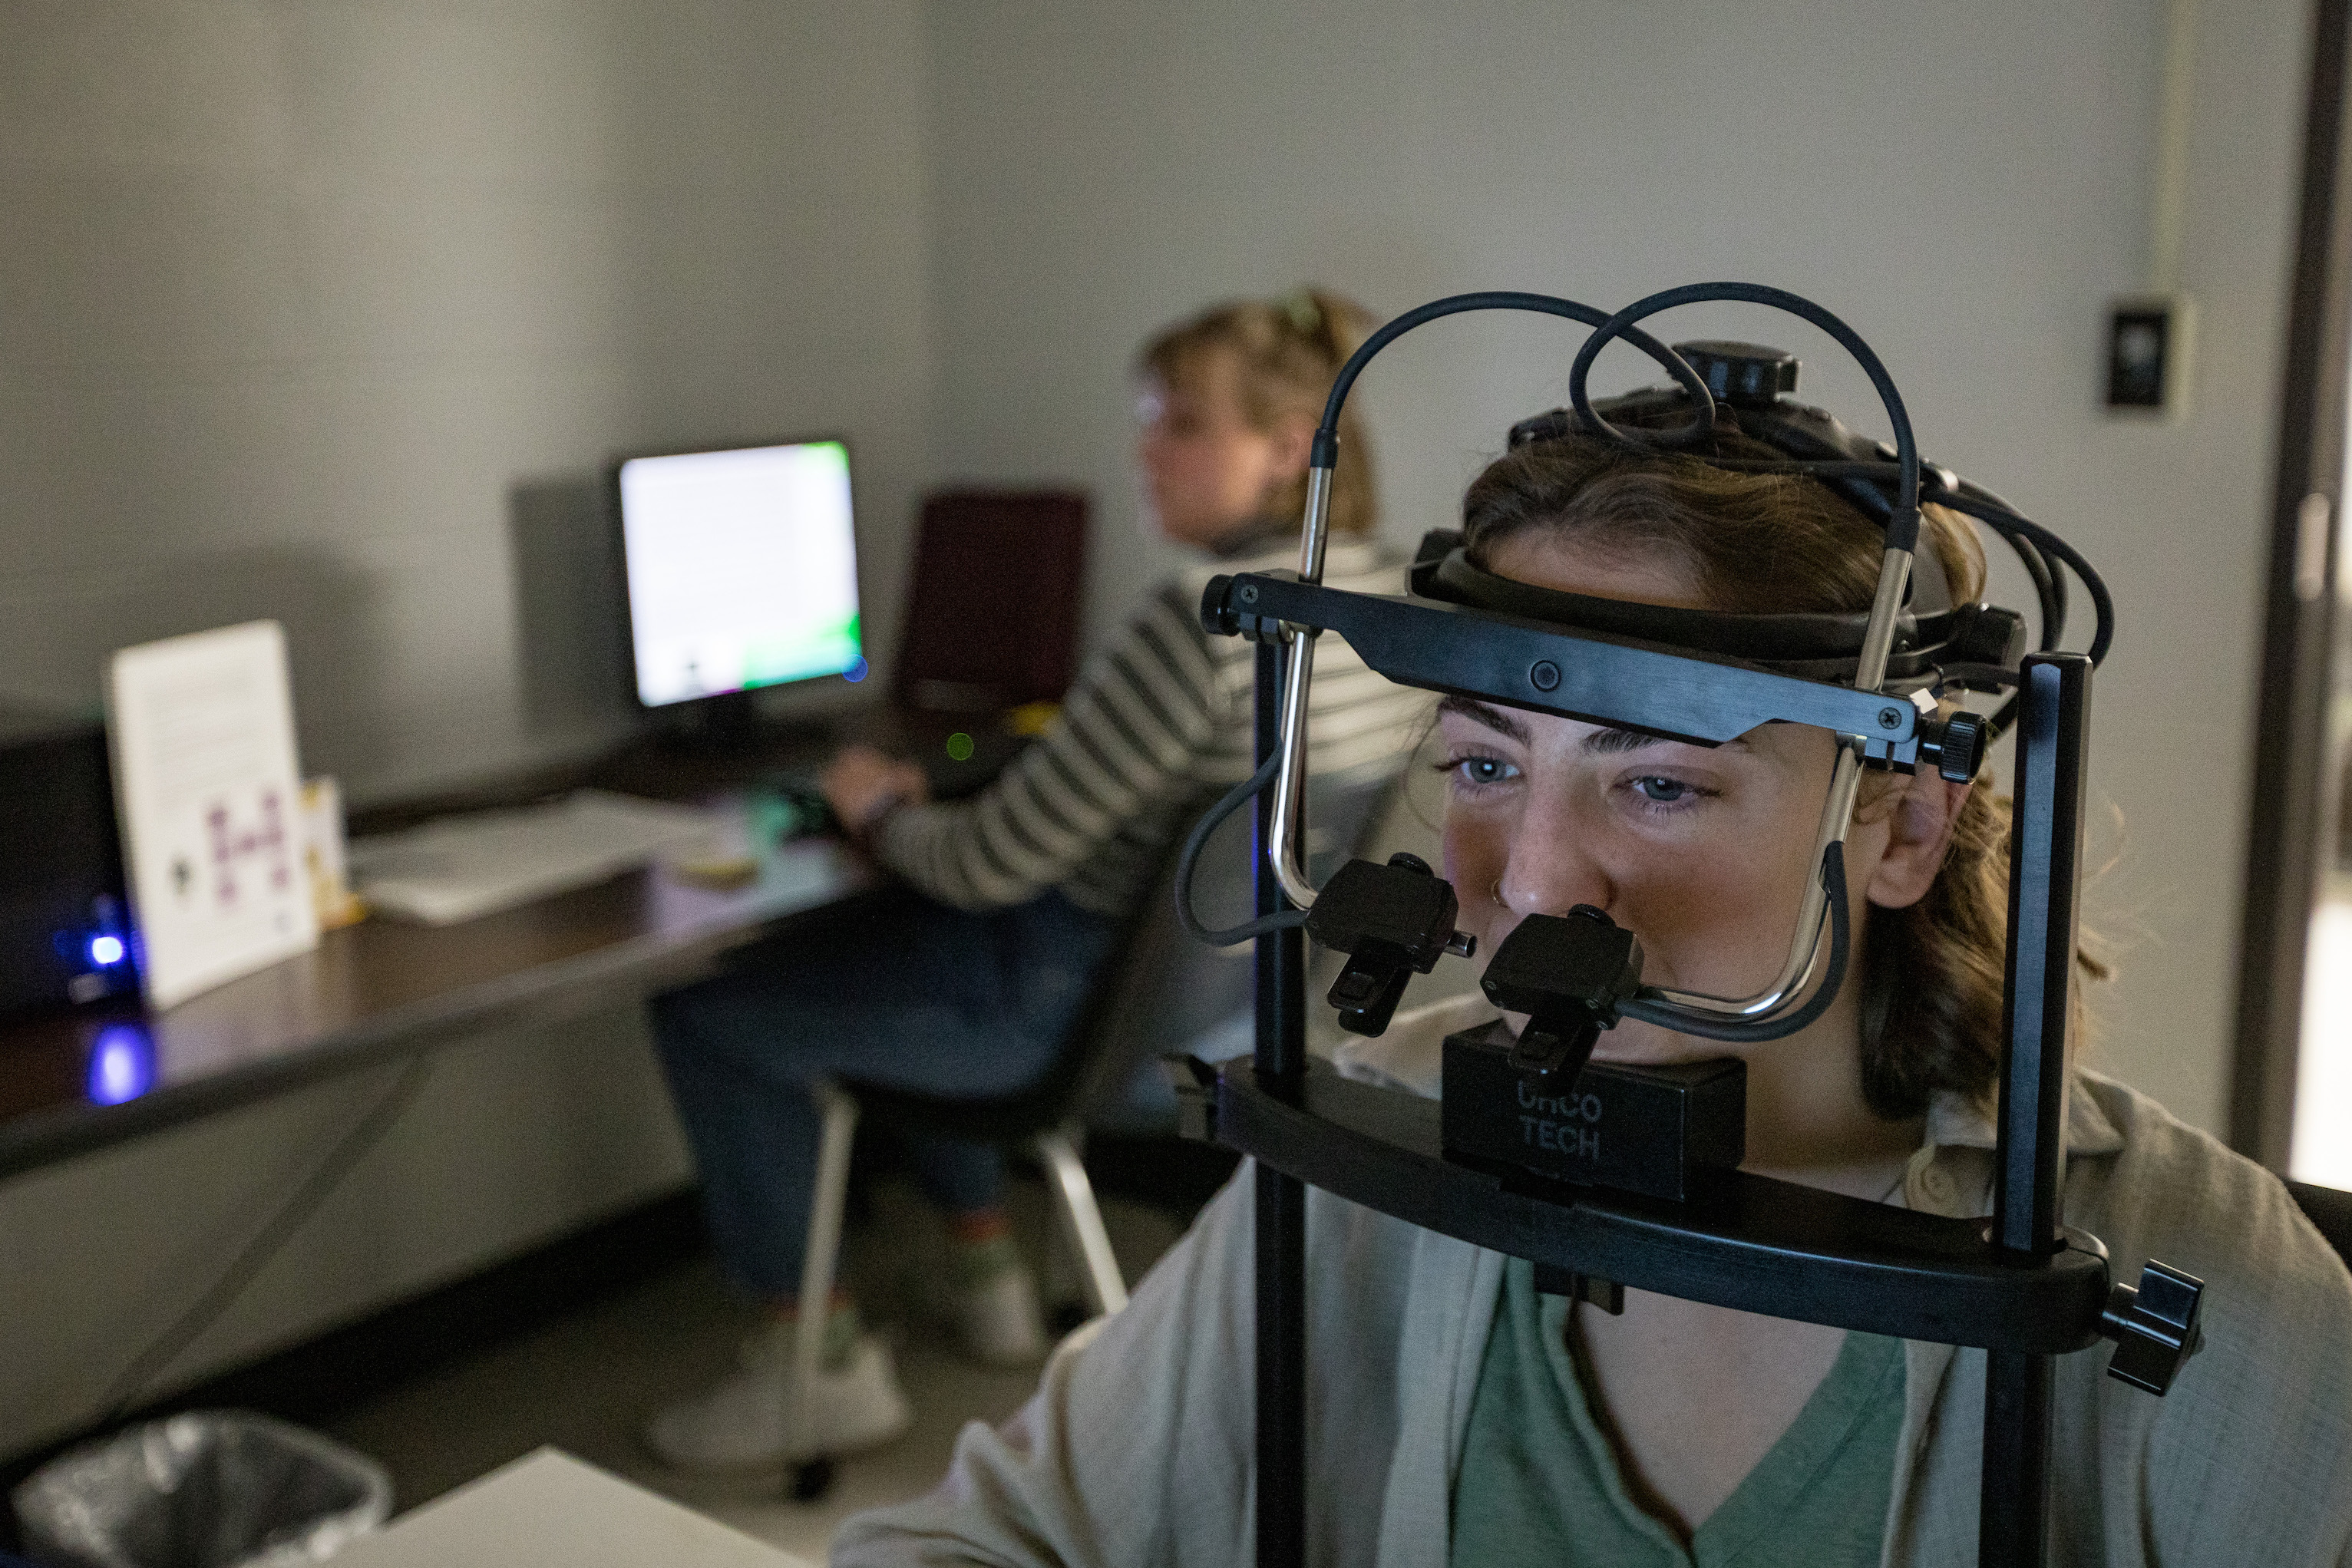 A student's head rests in an eye tracking device.